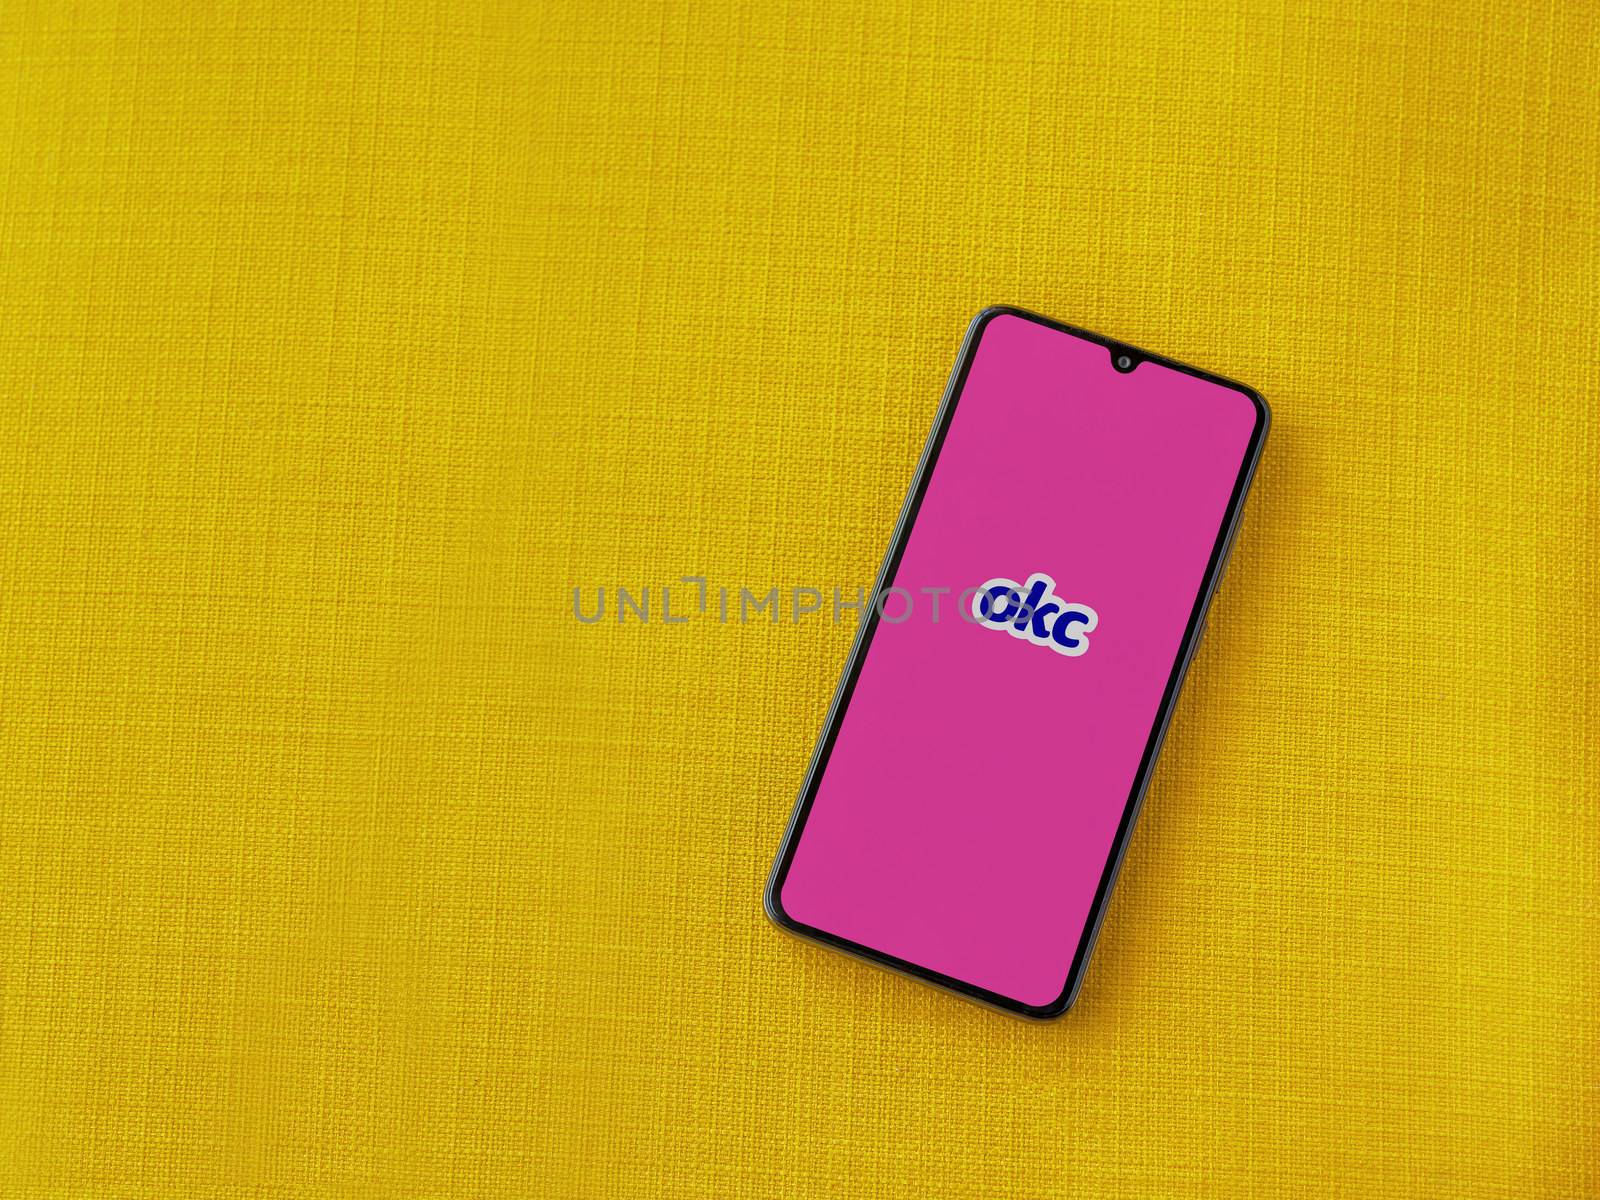 Lod, Israel - July 8, 2020: OkCupid app launch screen with logo on the display of a black mobile smartphone on a yellow fabric background. Top view flat lay with copy space.